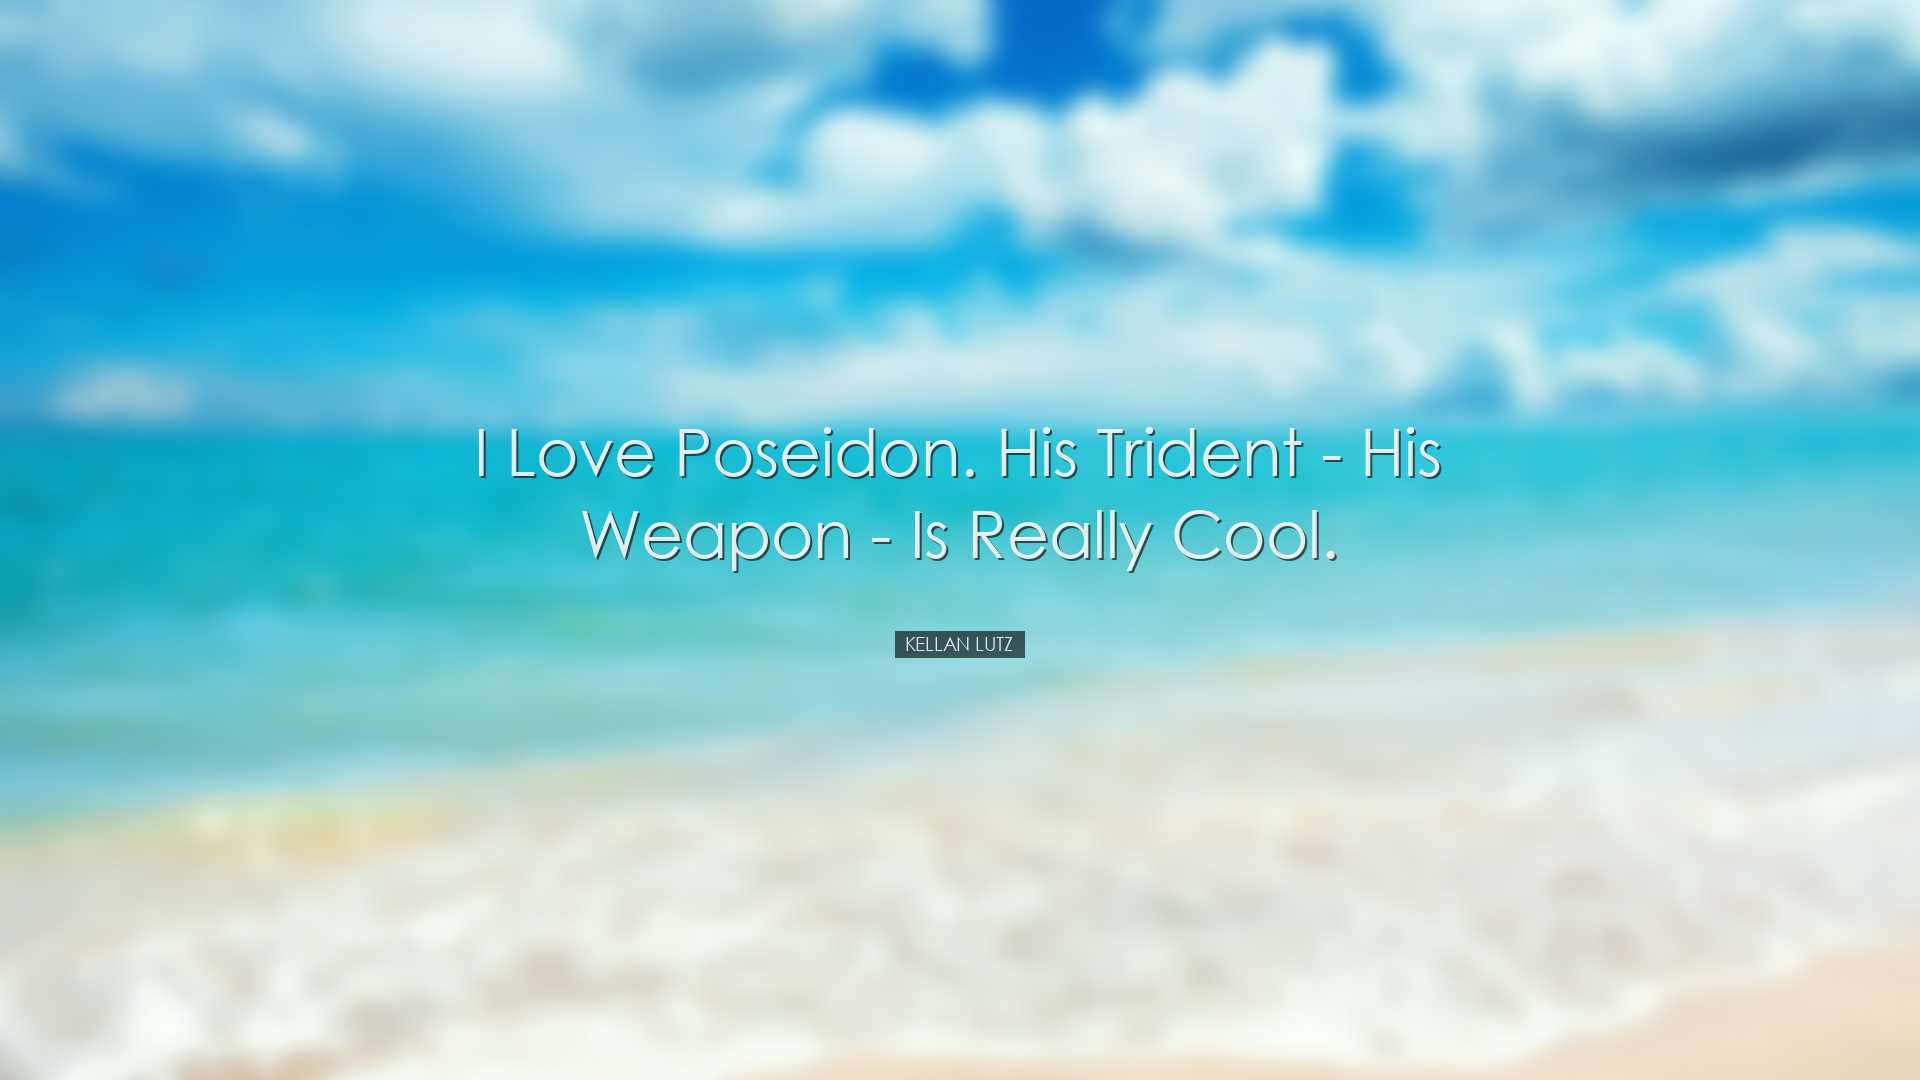 I love Poseidon. His trident - his weapon - is really cool. - Kell